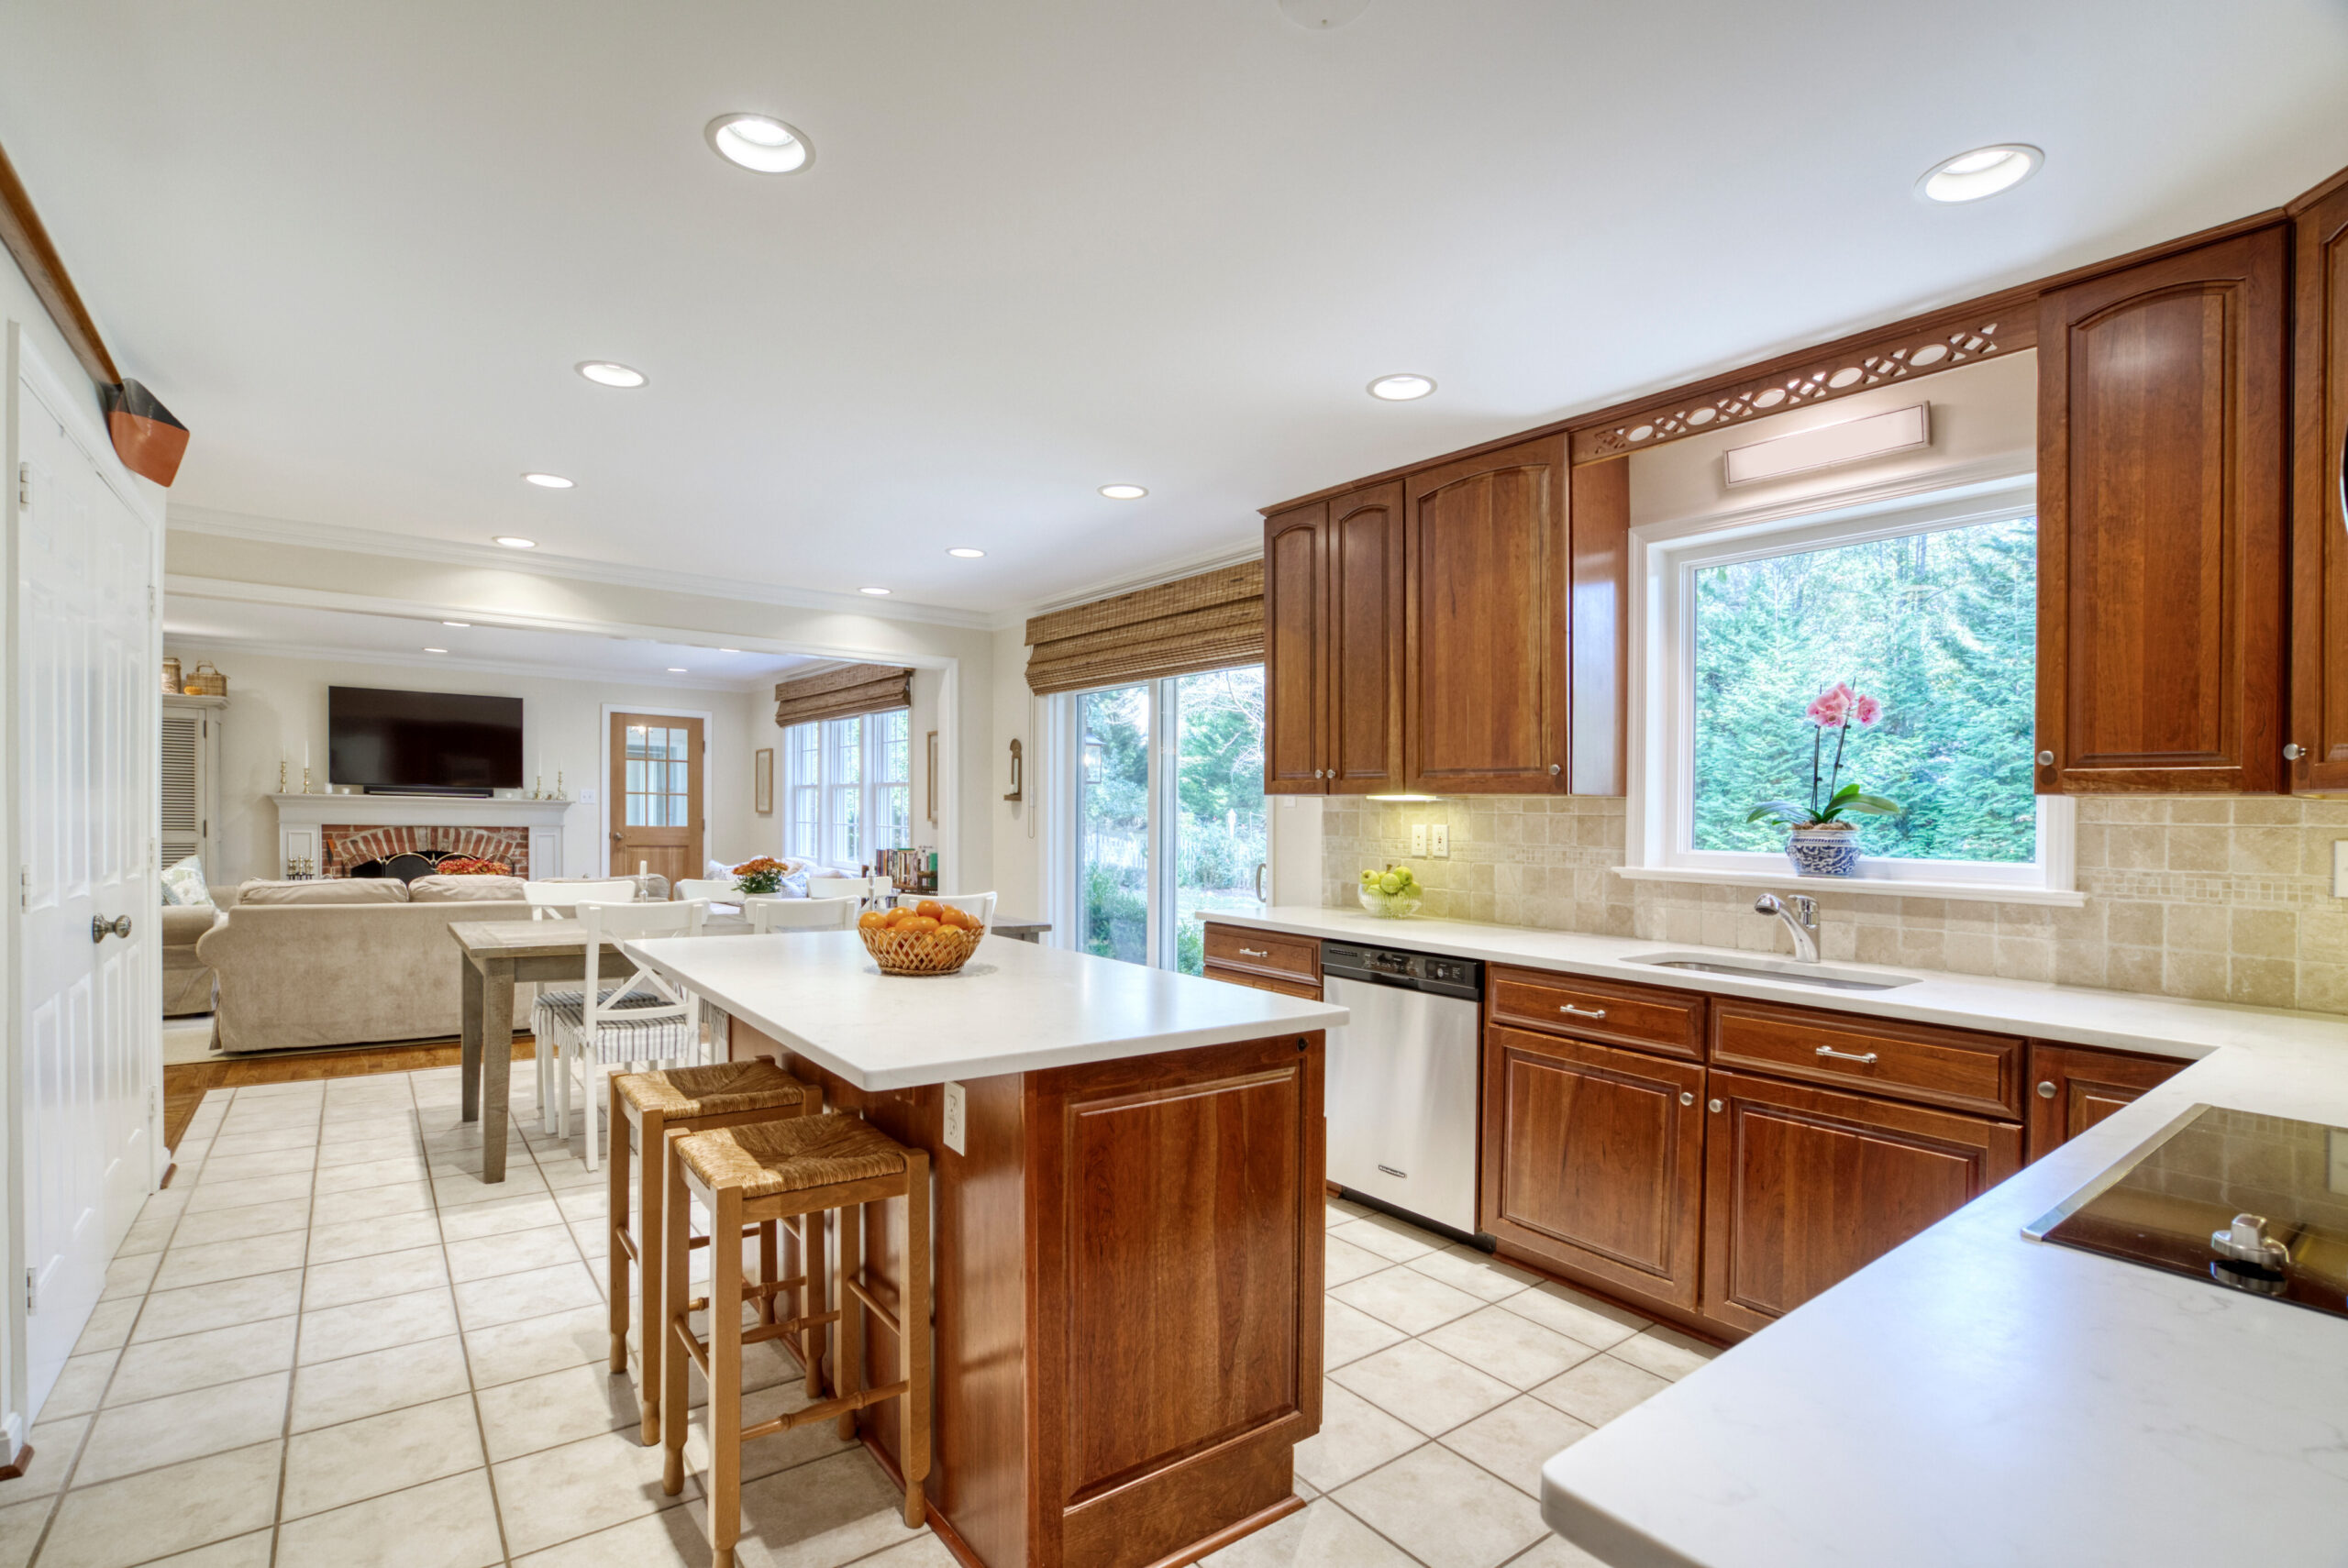 Professional interior photo of 8305 River Falls Dr, Potomac, MD - showing open kitchen with oak cabinets and center island with barstools. Family room visible in the background